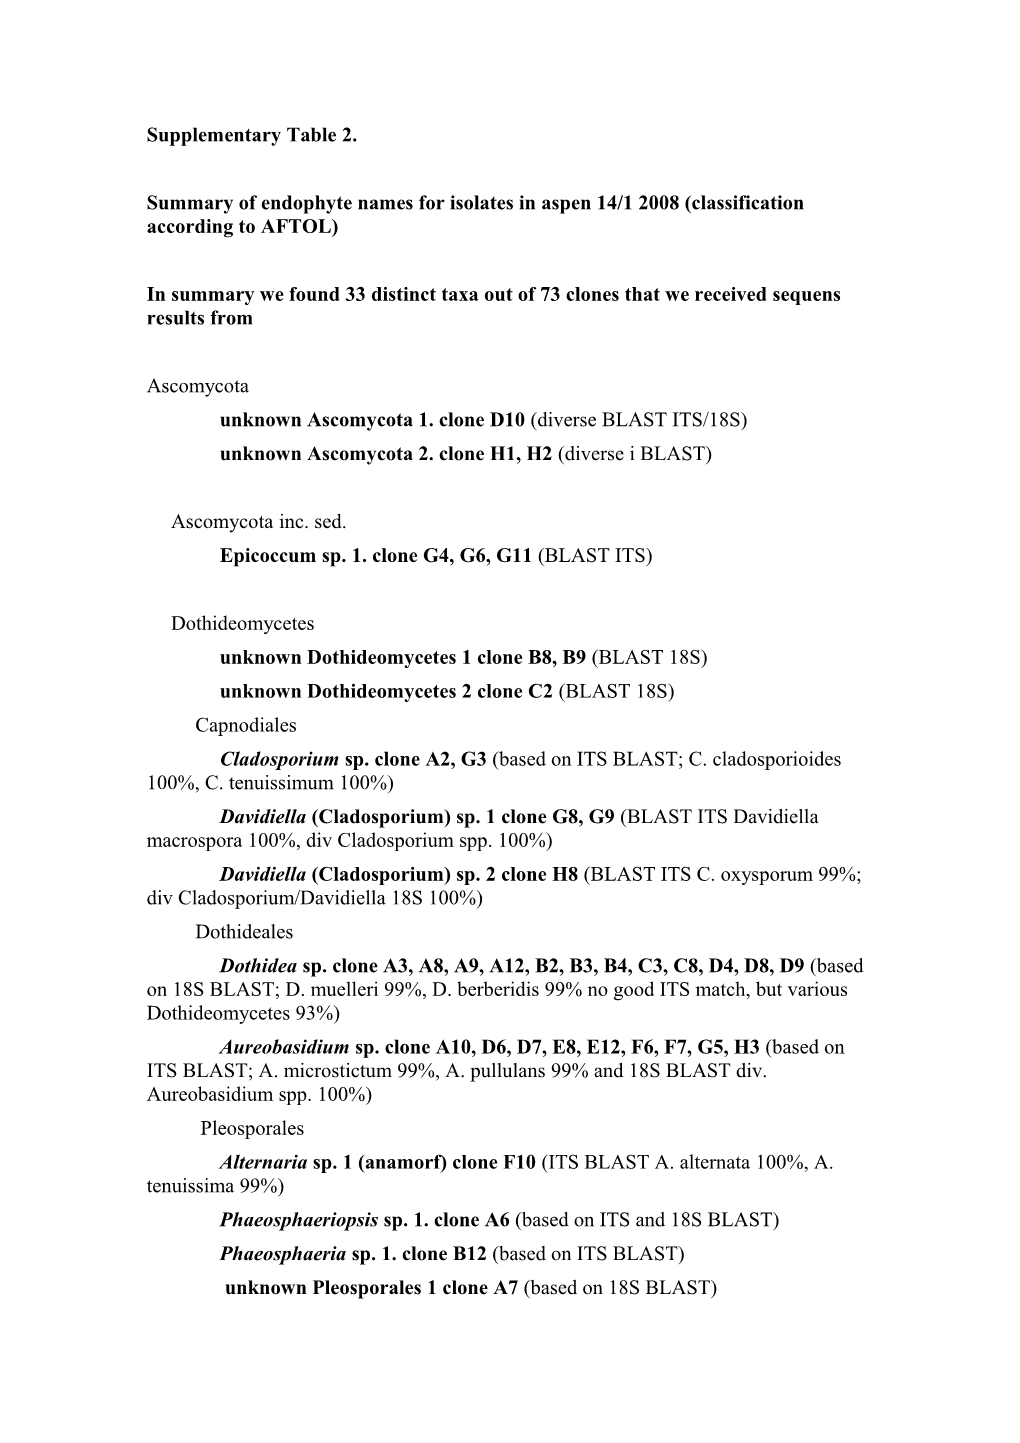 Summary of Endophyte Names for Isolates in Aspen 14/1 2008 (Classification According to AFTOL)